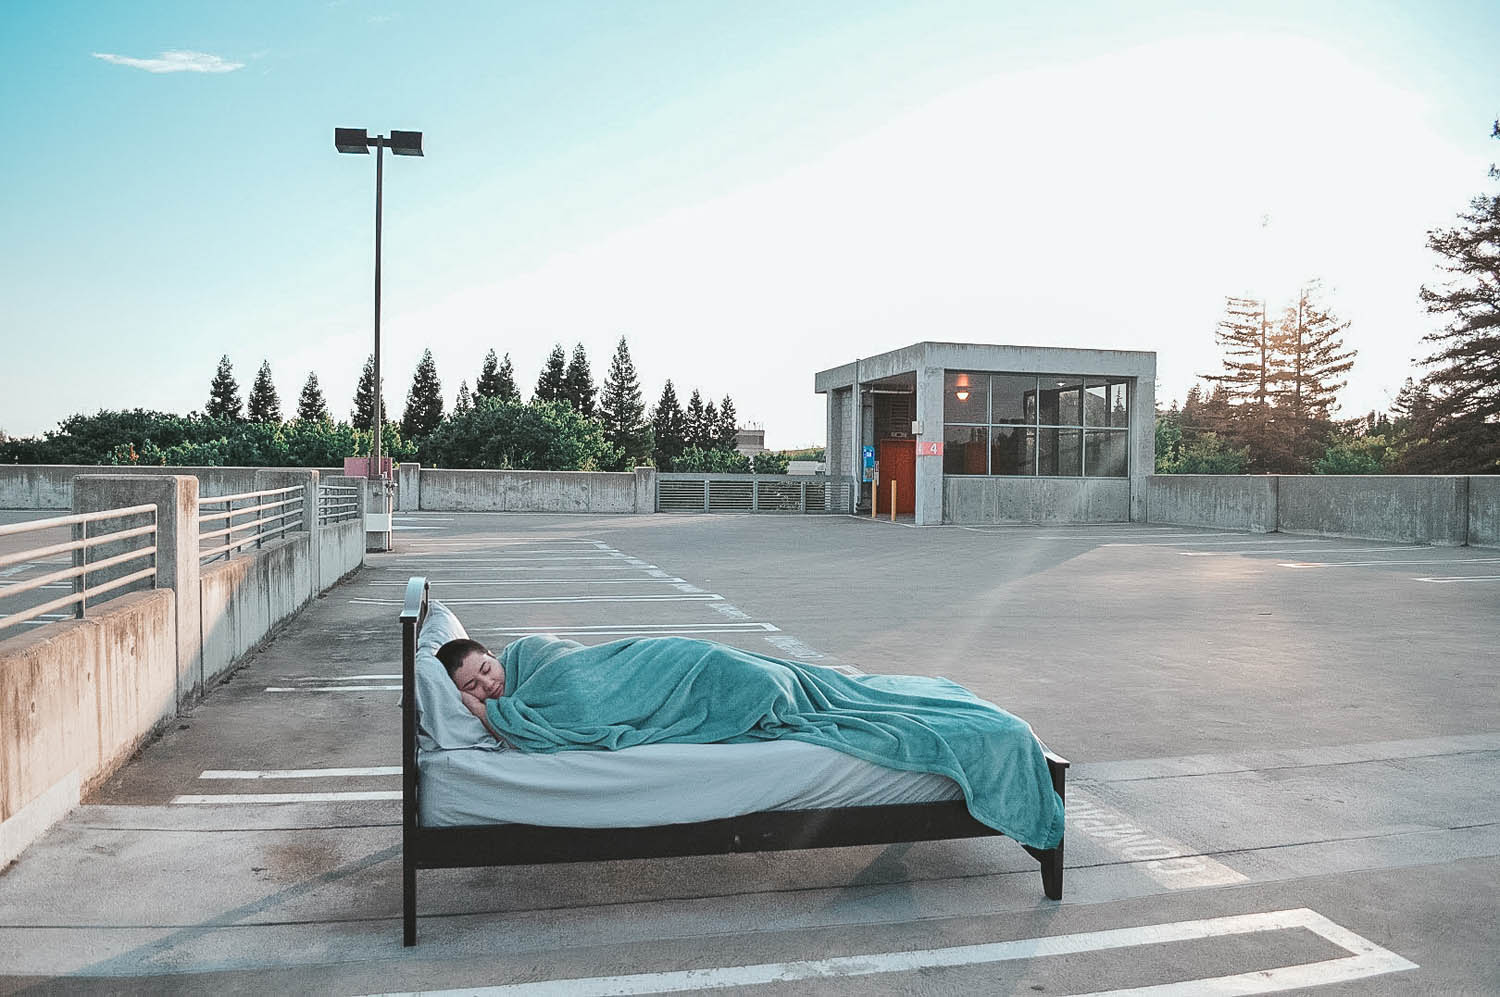 A close up photo of a person sleeping in a bed which is sitting in the middle of an empty parking lot.